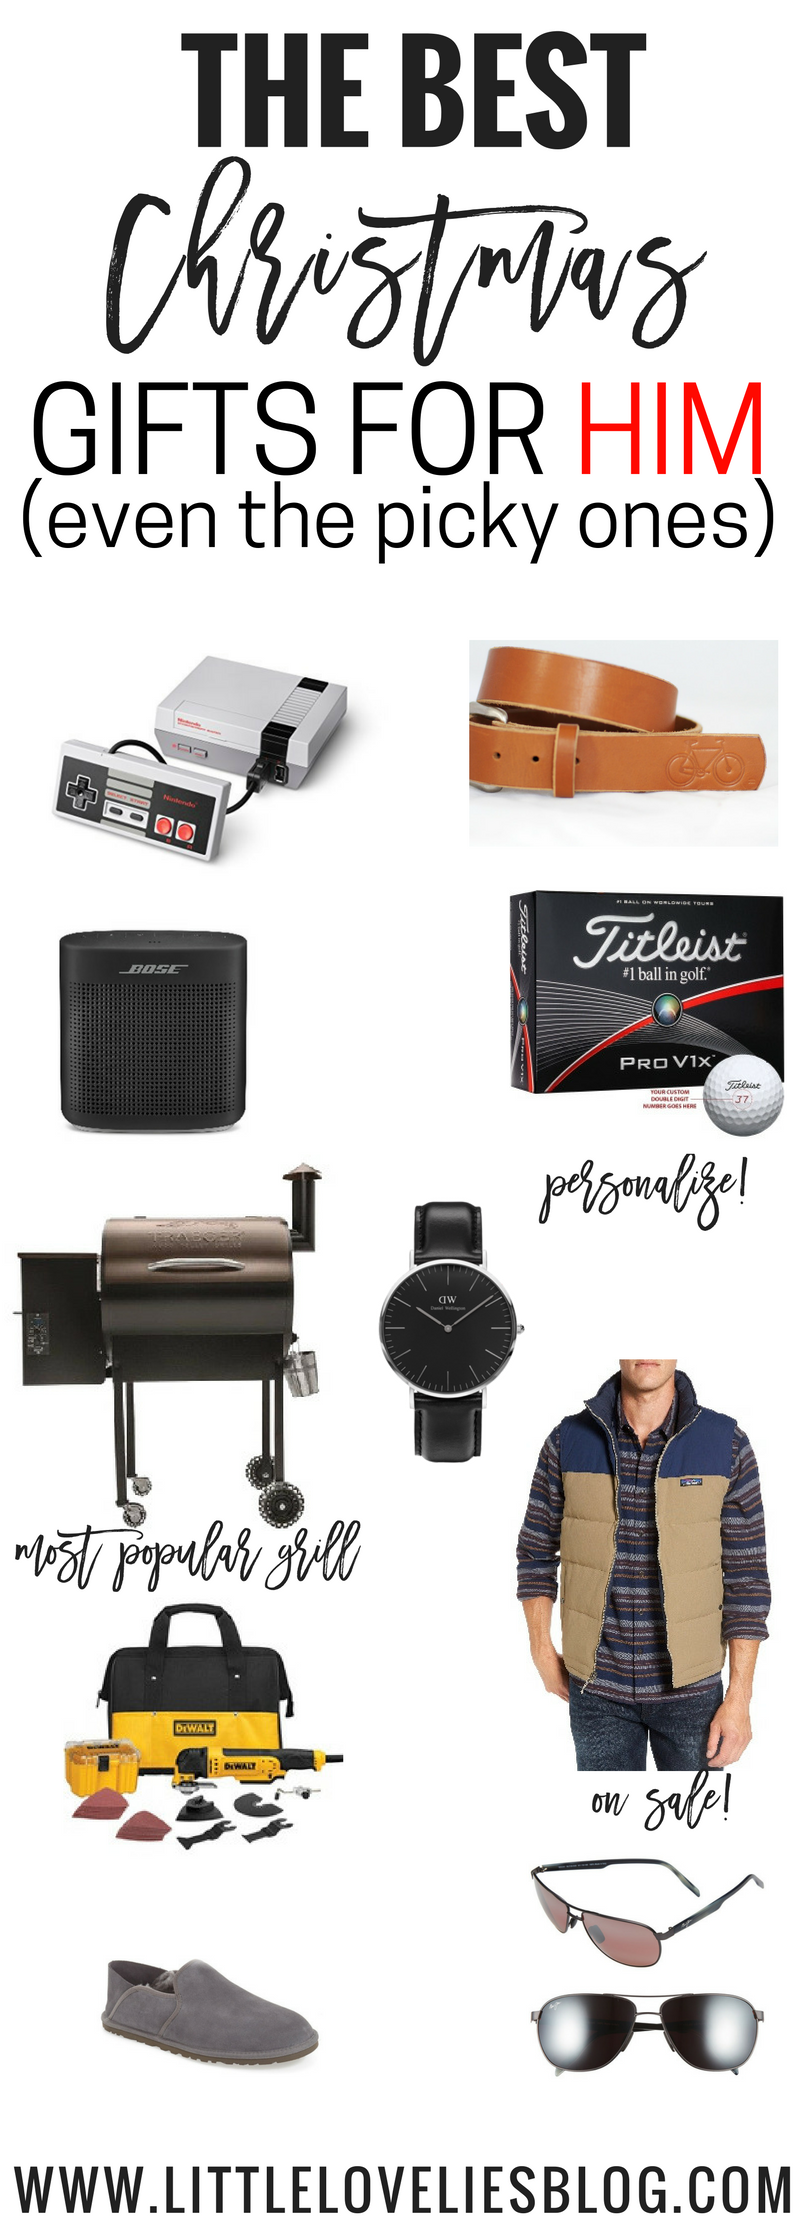 11 Gifts for Men That They'll Actually Love - Ashlee Nichols